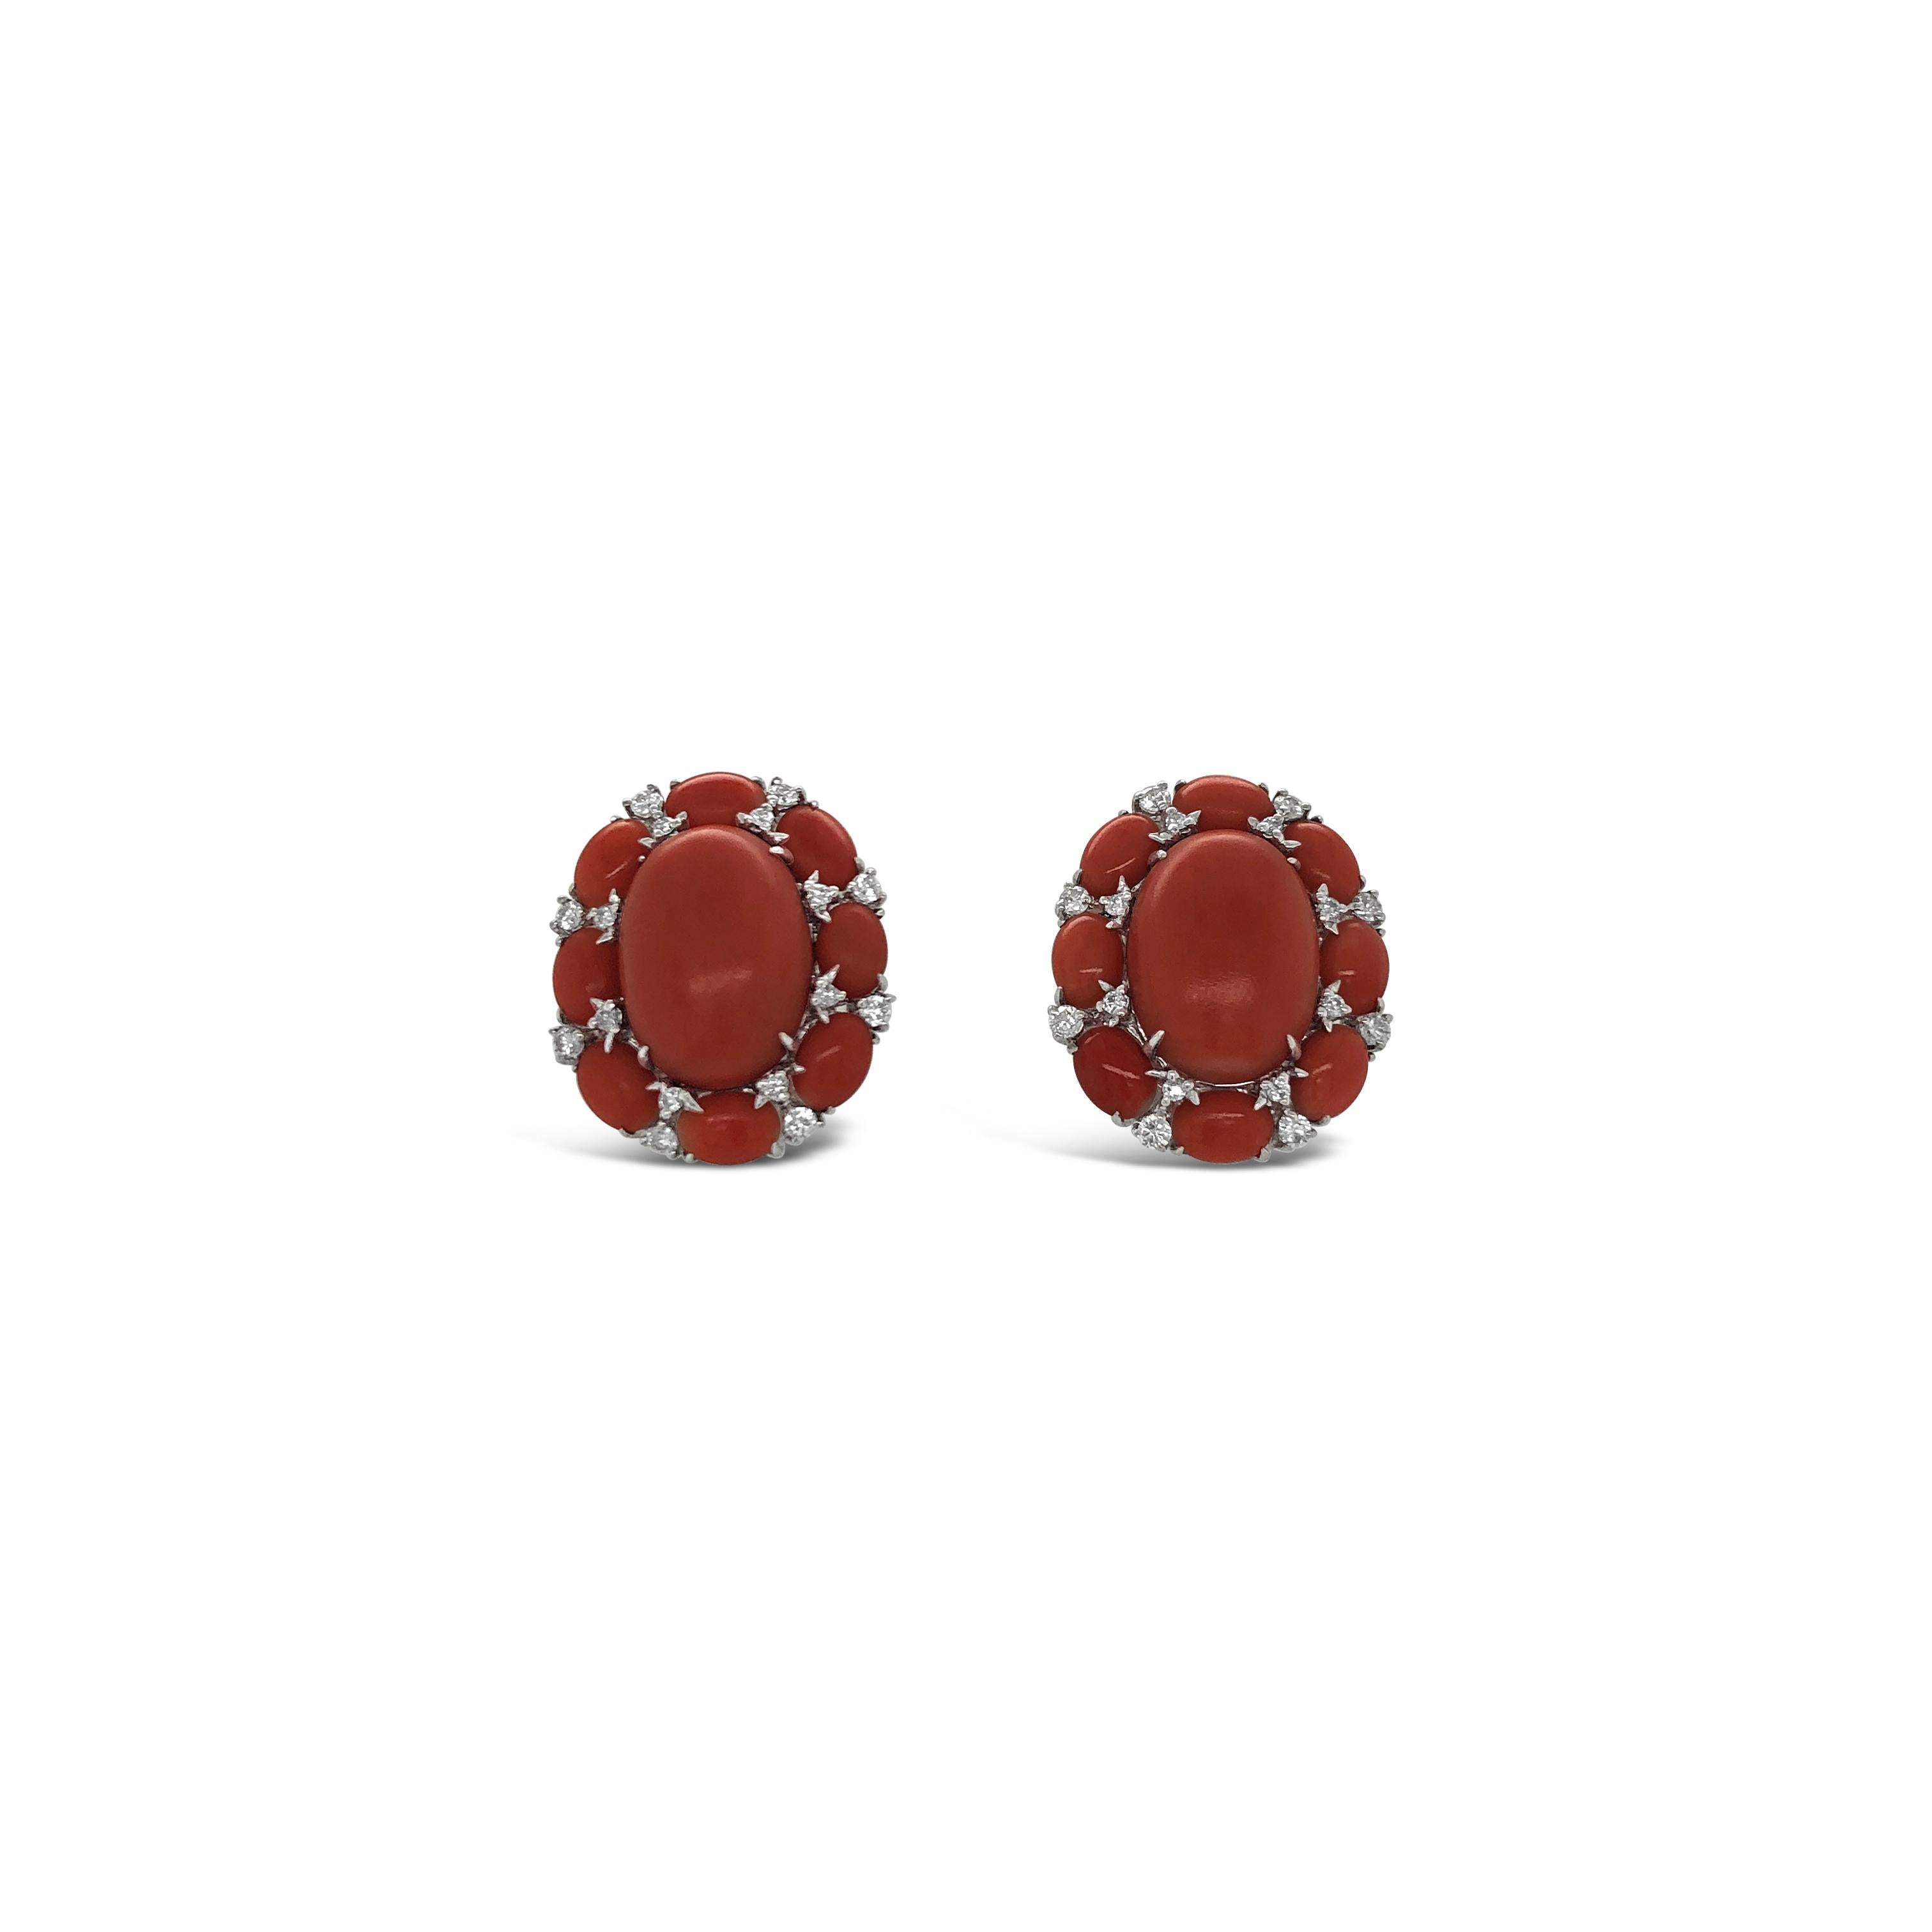 18K White Gold and Diamond Coral Earrings that Clip On.  
32 ROUND DIAMONDS 
Stamped 18K and 750
Oval Coral 